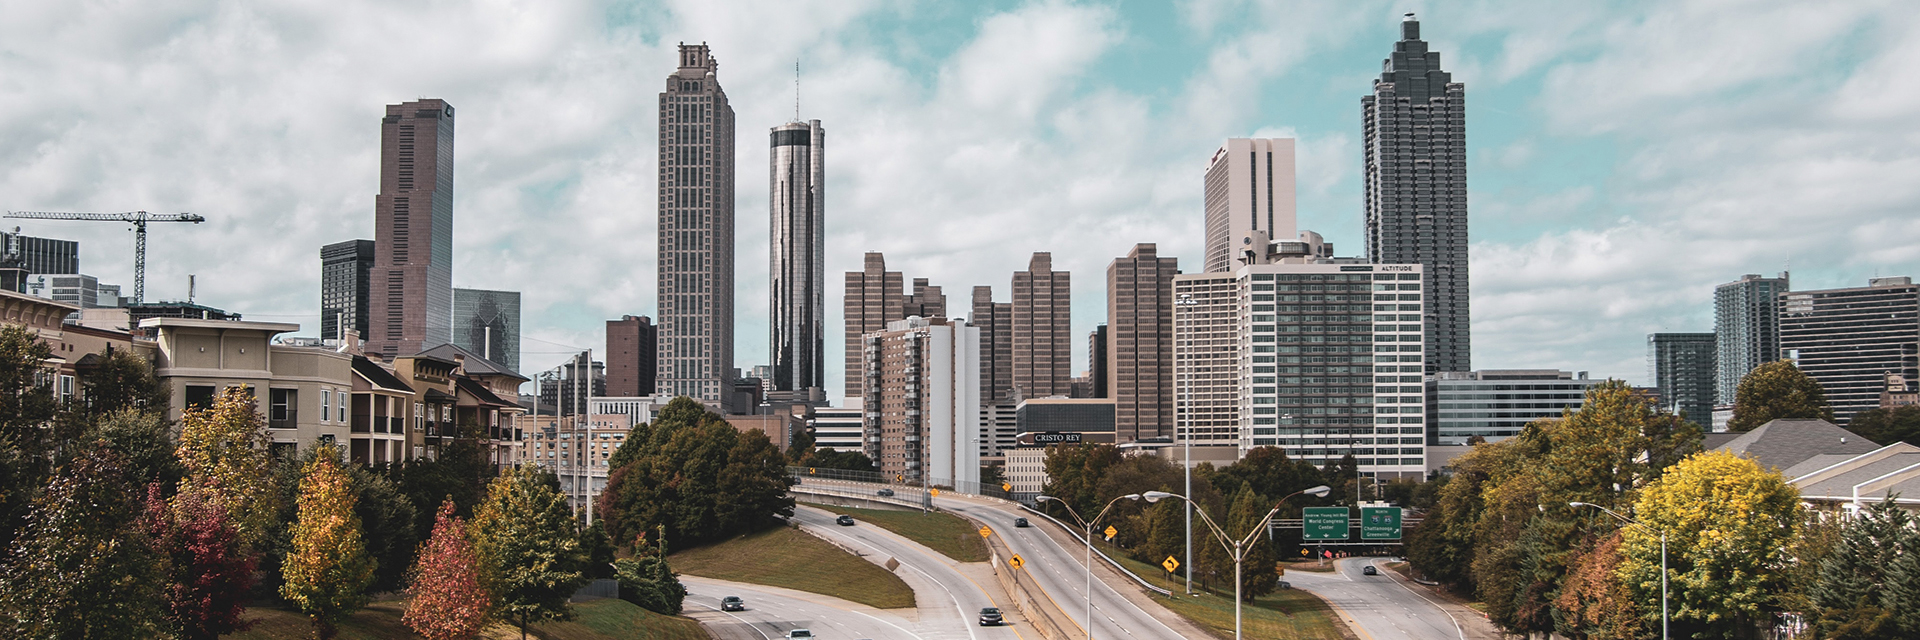 The Atlanta skyline with a highway leading towards the buildings.